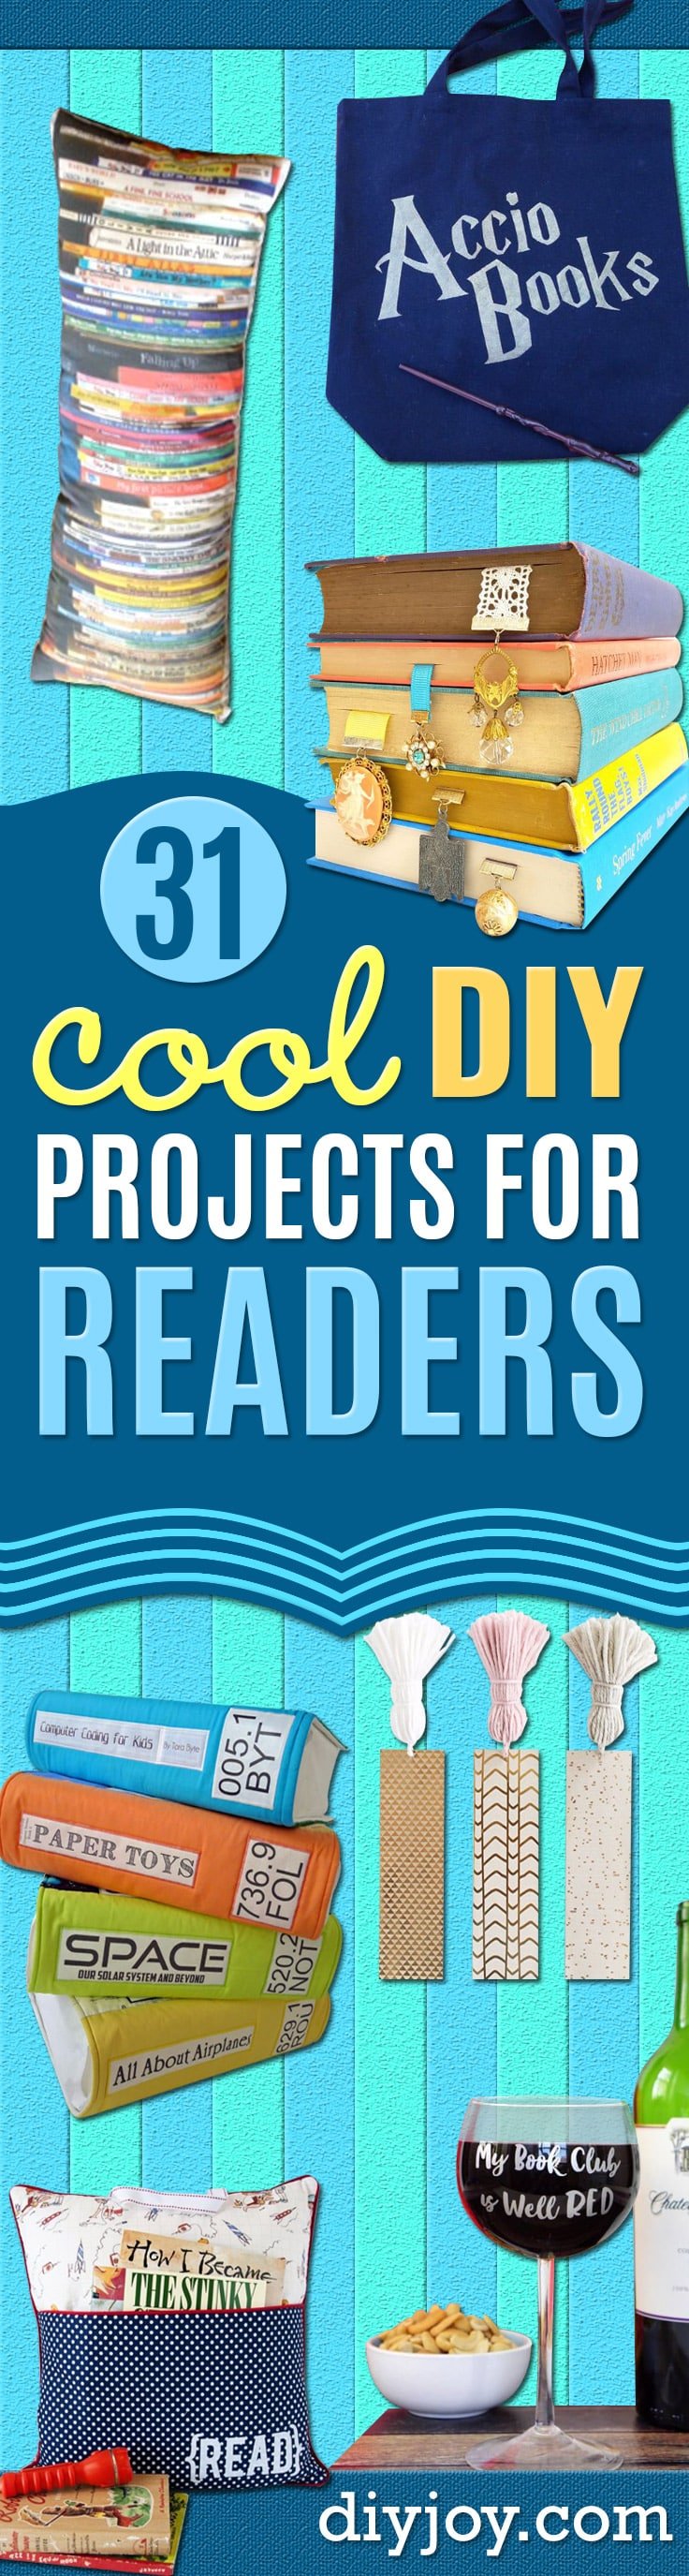 DIY Projects for Readers - Book Storage, Bookmarks, Cool Bookshelves, Creative Projects Made With Books and For Book Lovers - Reading Lights, Bedside Table Ideas - Easy Crafts and DIY Ideas by DIY JOY